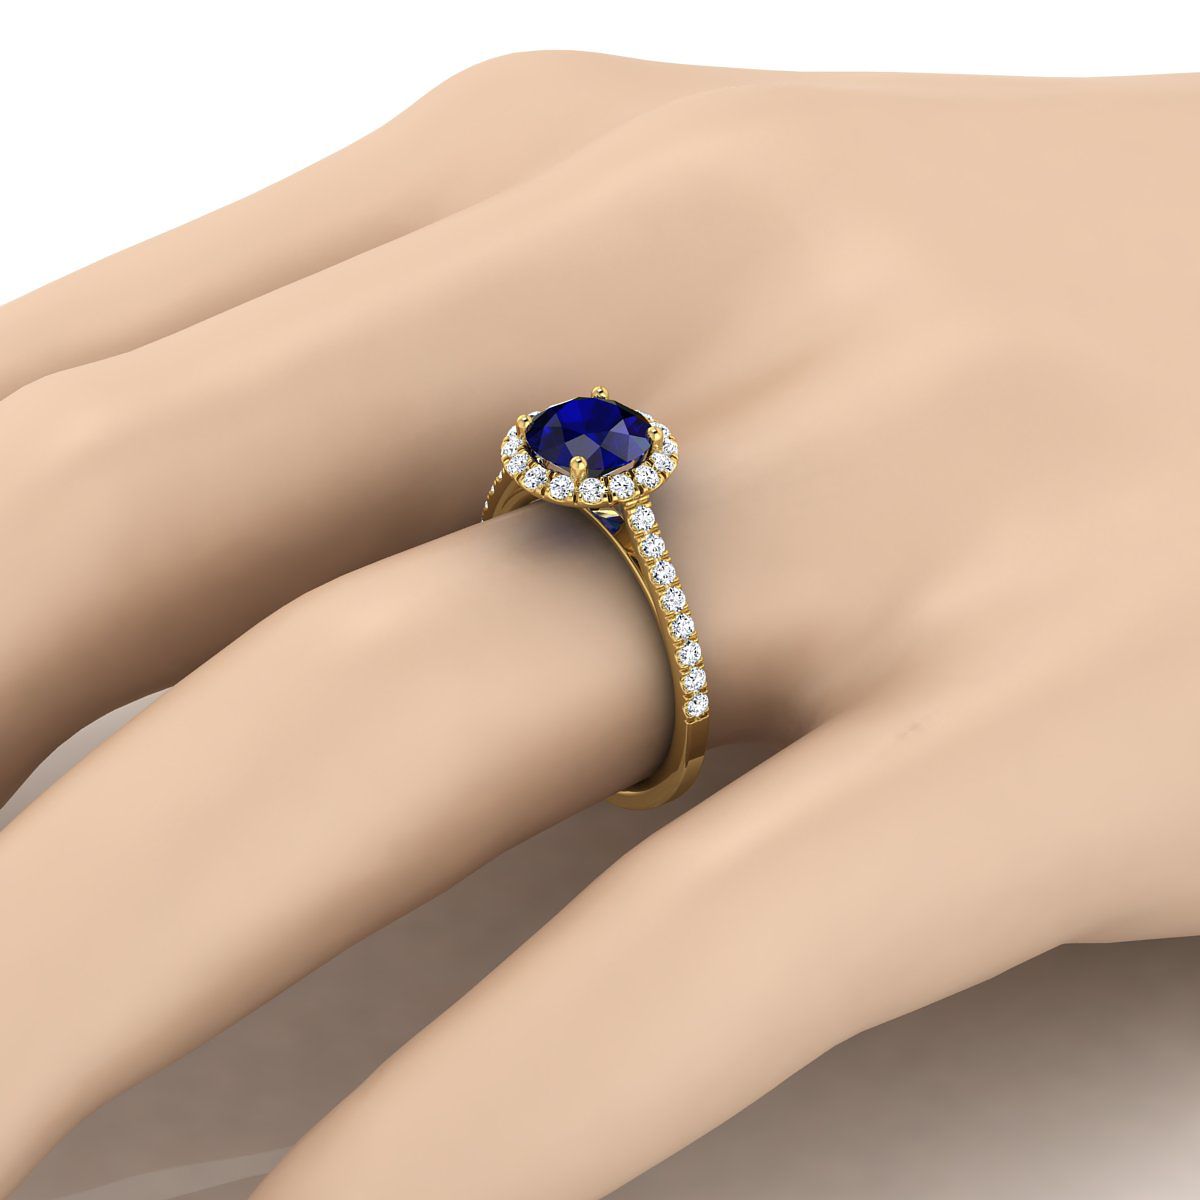 14K Yellow Gold Round Brilliant Sapphire Petite Halo French Diamond Pave Engagement Ring -3/8ctw